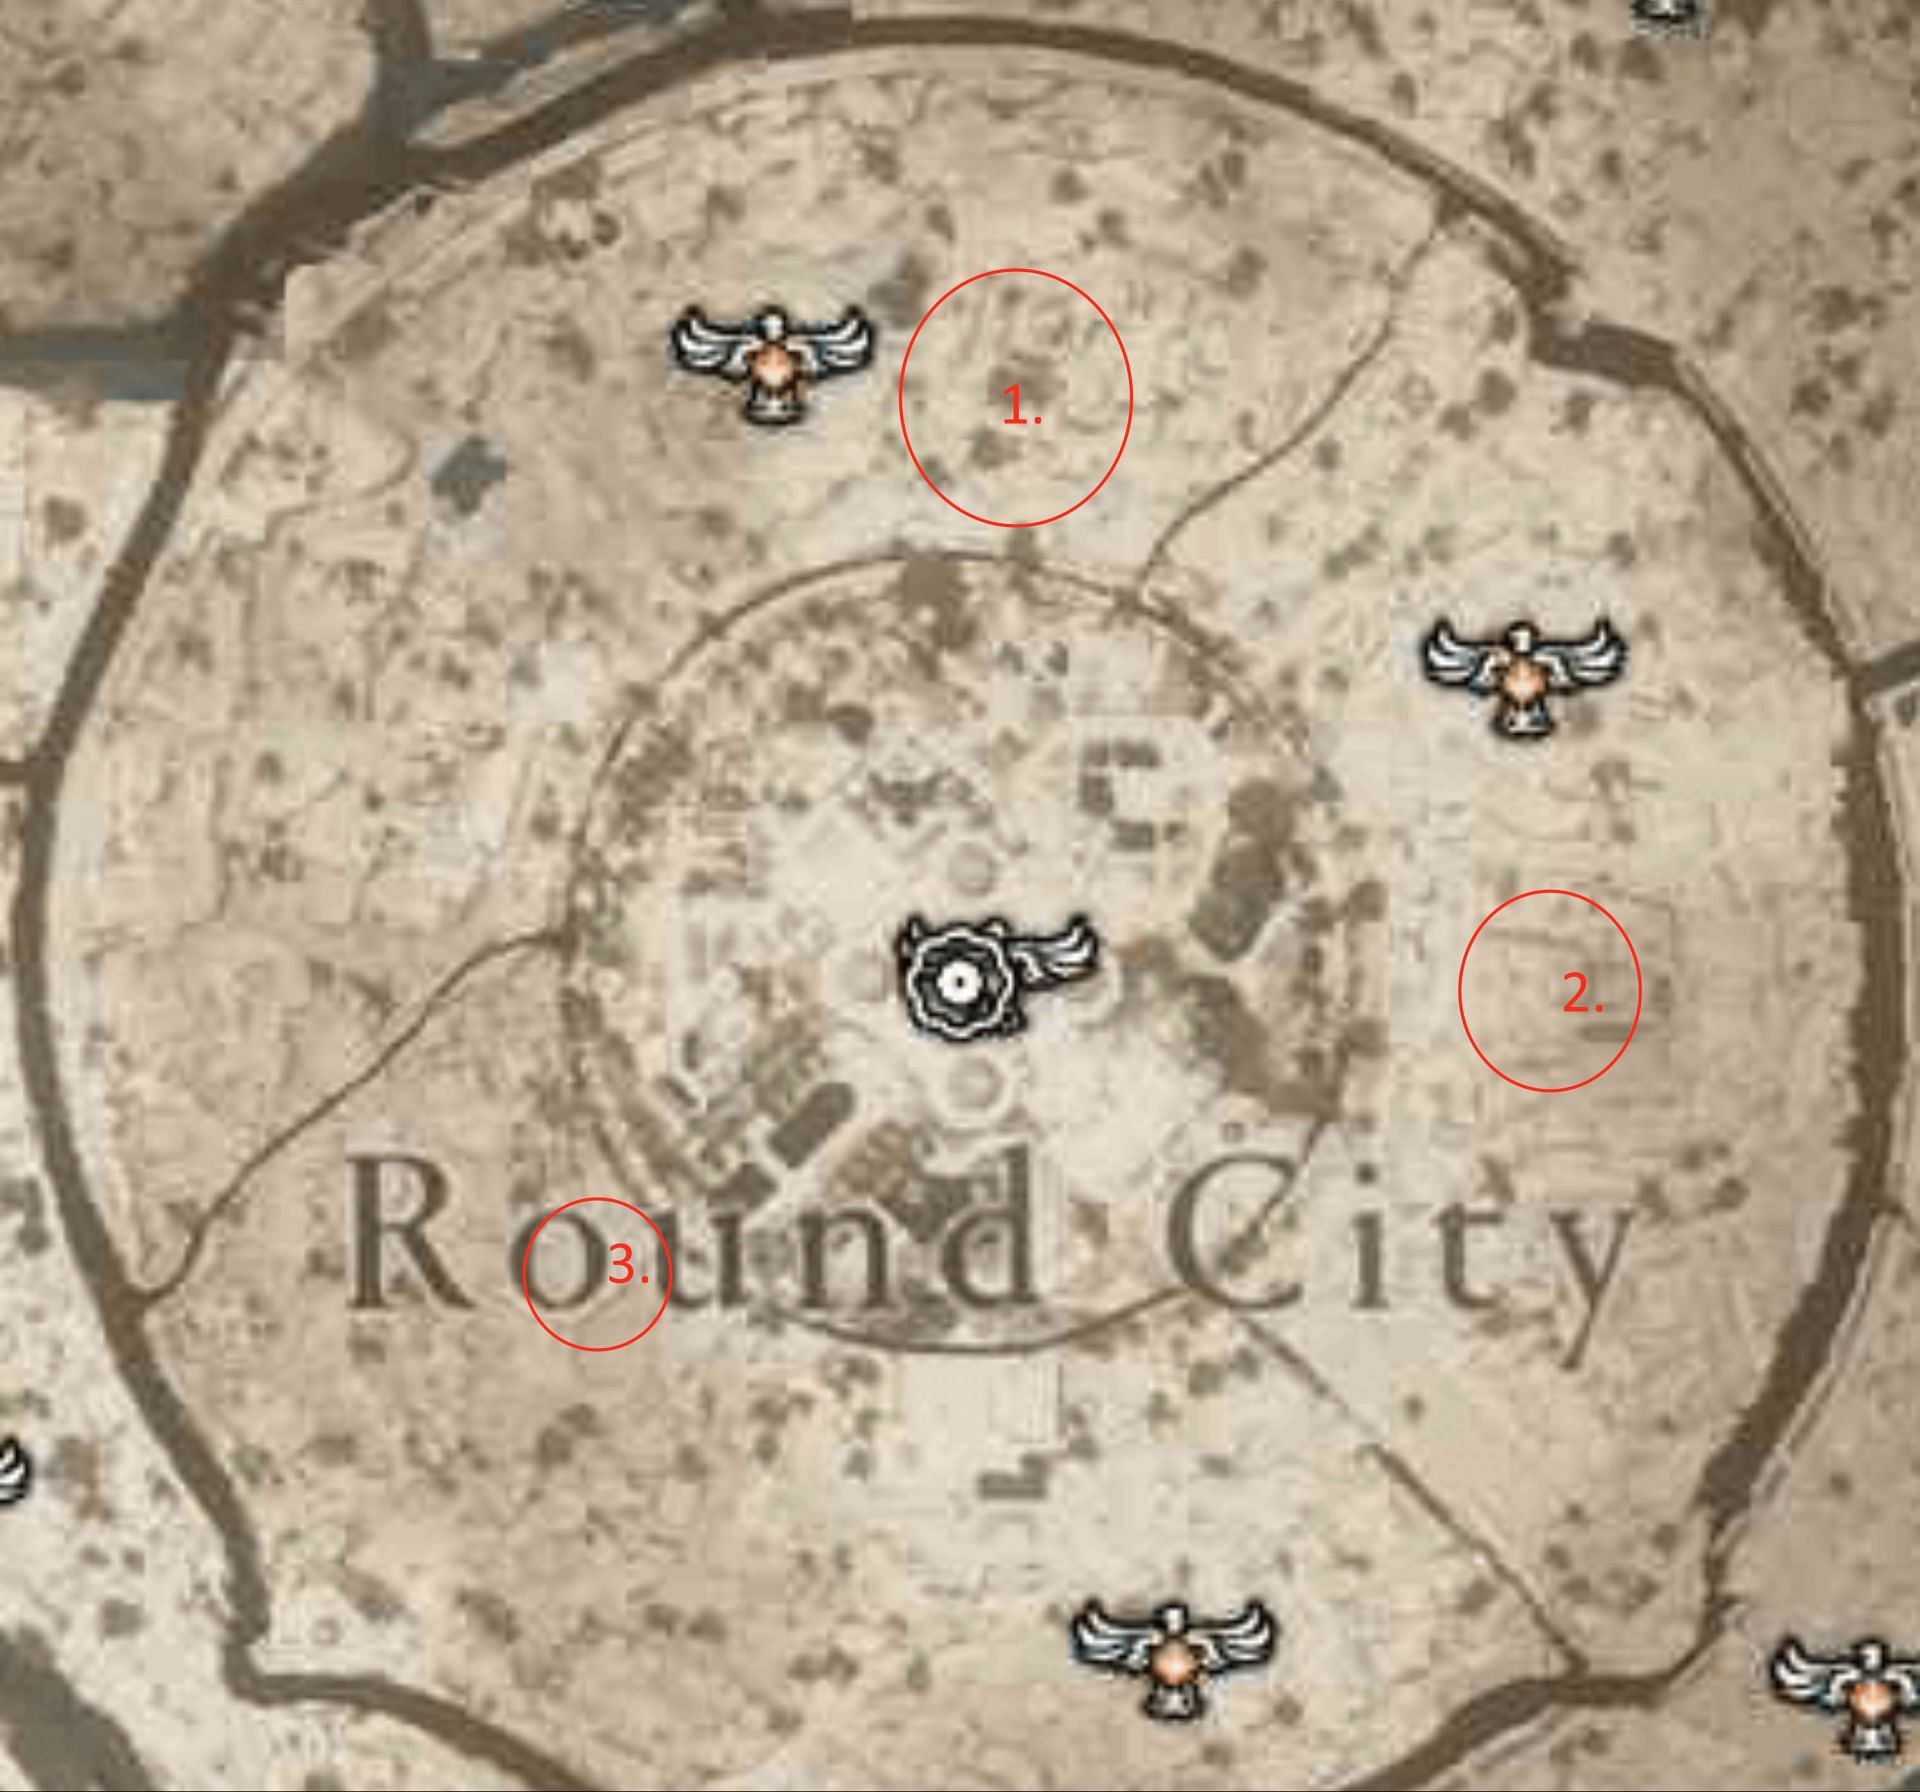 These chests are pretty simple to navigate towards (Image via Ubisoft)